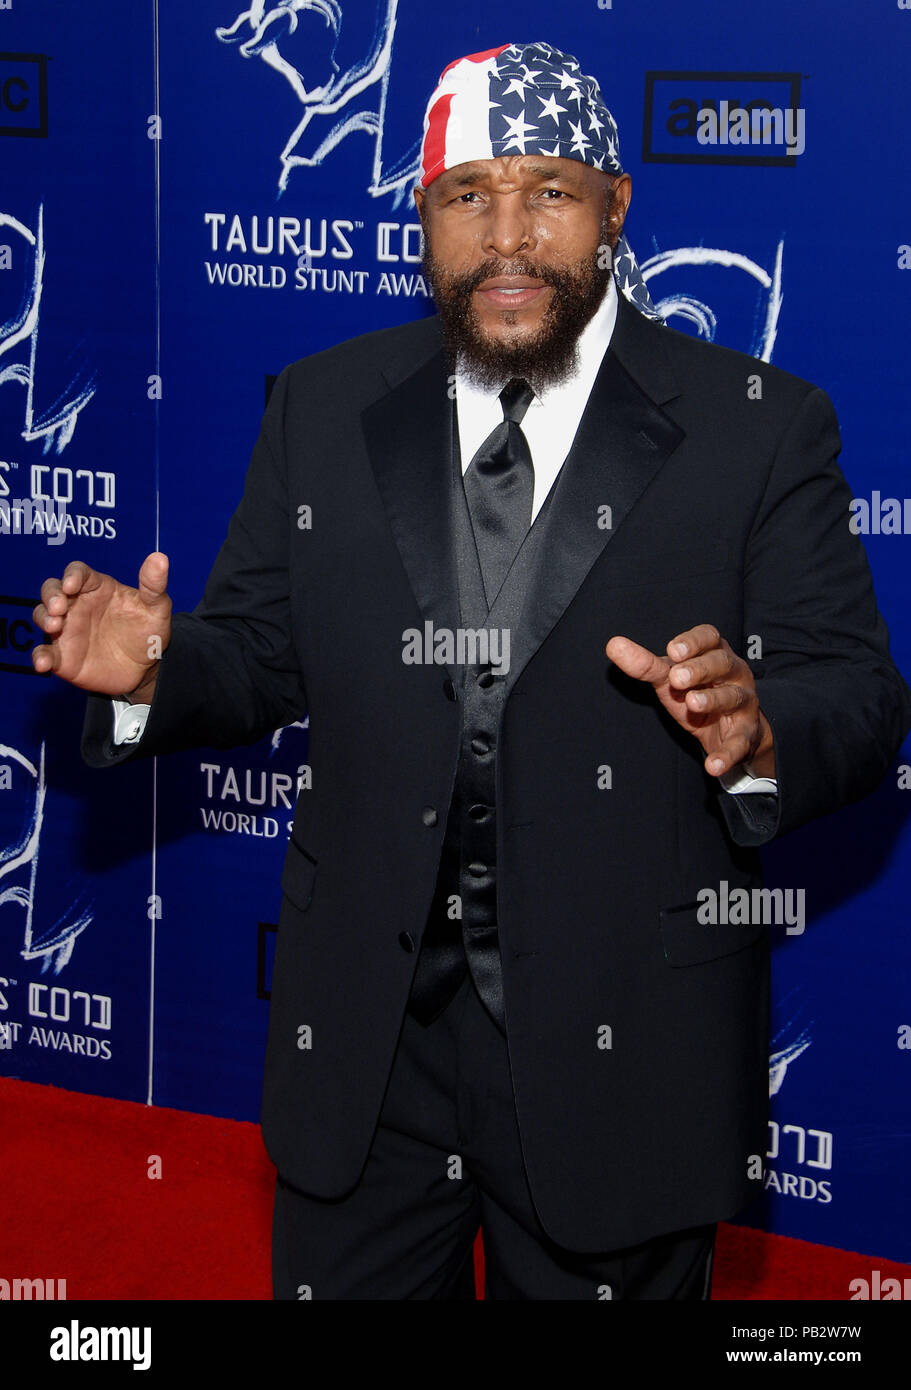 Mister T  arriving at the 2007 TAURUS World Stunt Awards on the Paramount Lot  In Los Angeles.   3/4 eye contact american flag as bandanaMrT 107 Red Carpet Event, Vertical, USA, Film Industry, Celebrities,  Photography, Bestof, Arts Culture and Entertainment, Topix Celebrities fashion /  Vertical, Best of, Event in Hollywood Life - California,  Red Carpet and backstage, USA, Film Industry, Celebrities,  movie celebrities, TV celebrities, Music celebrities, Photography, Bestof, Arts Culture and Entertainment,  Topix, vertical, one person,, from the years , 2006 to 2009, inquiry tsuni@Gamma-USA. Stock Photo